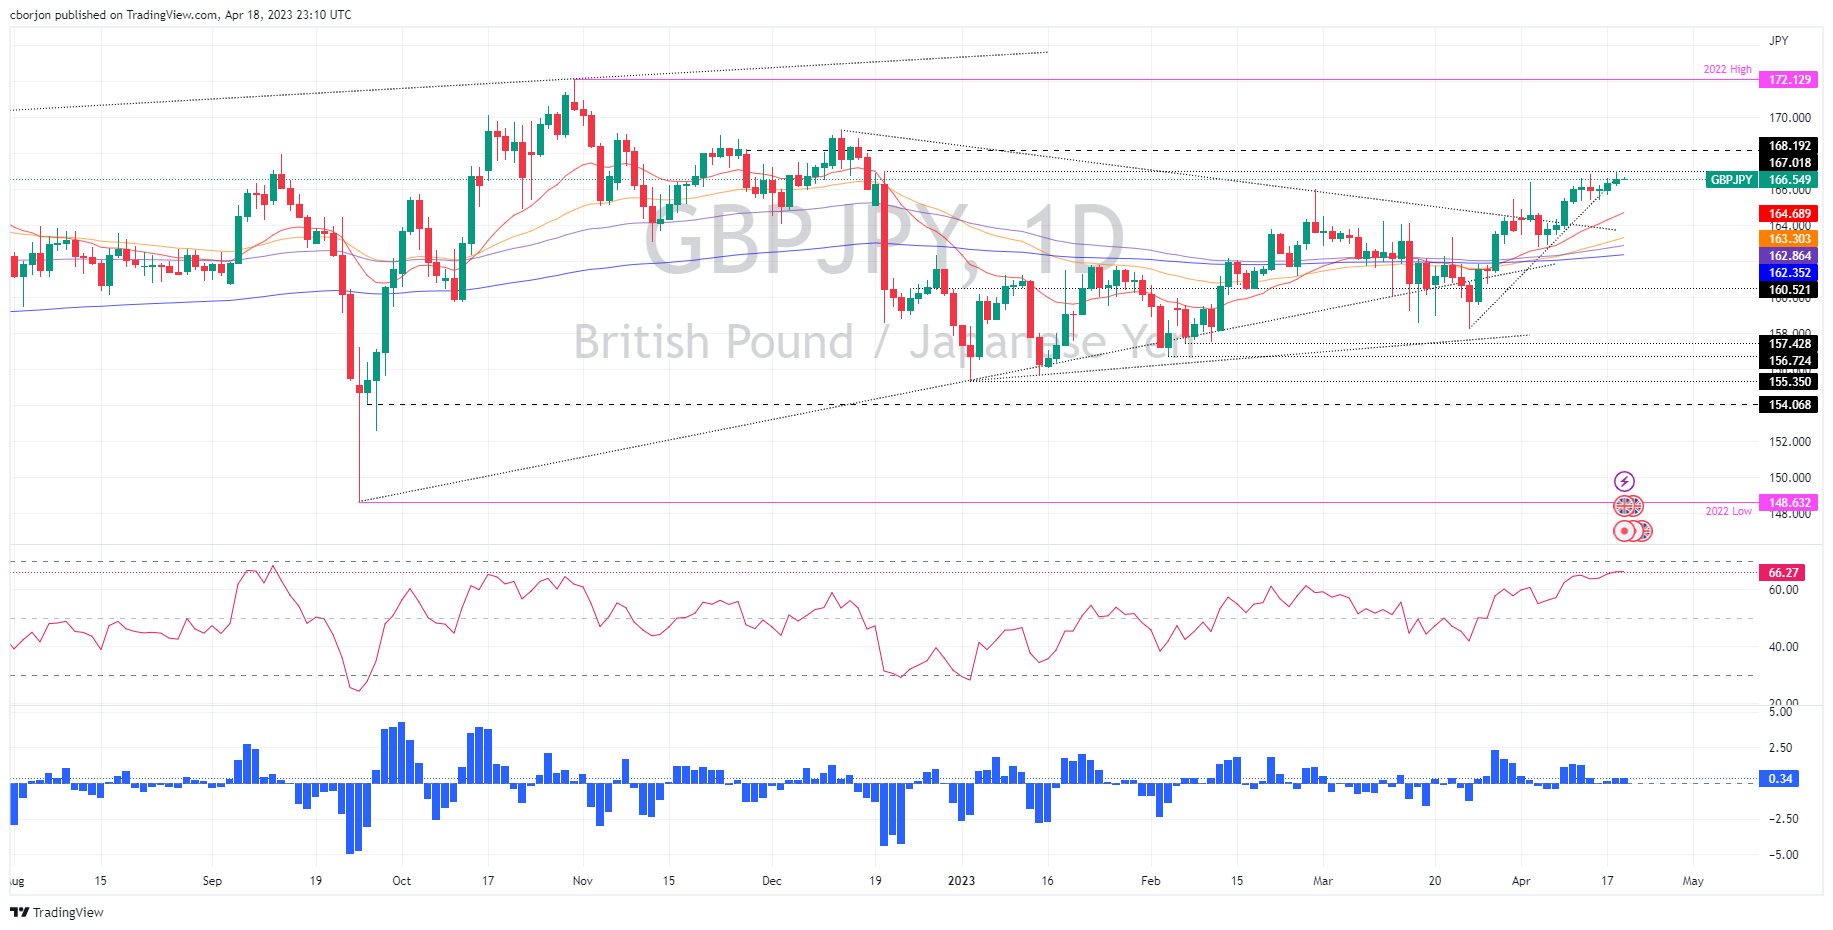 GBP/JPY Daily Chart